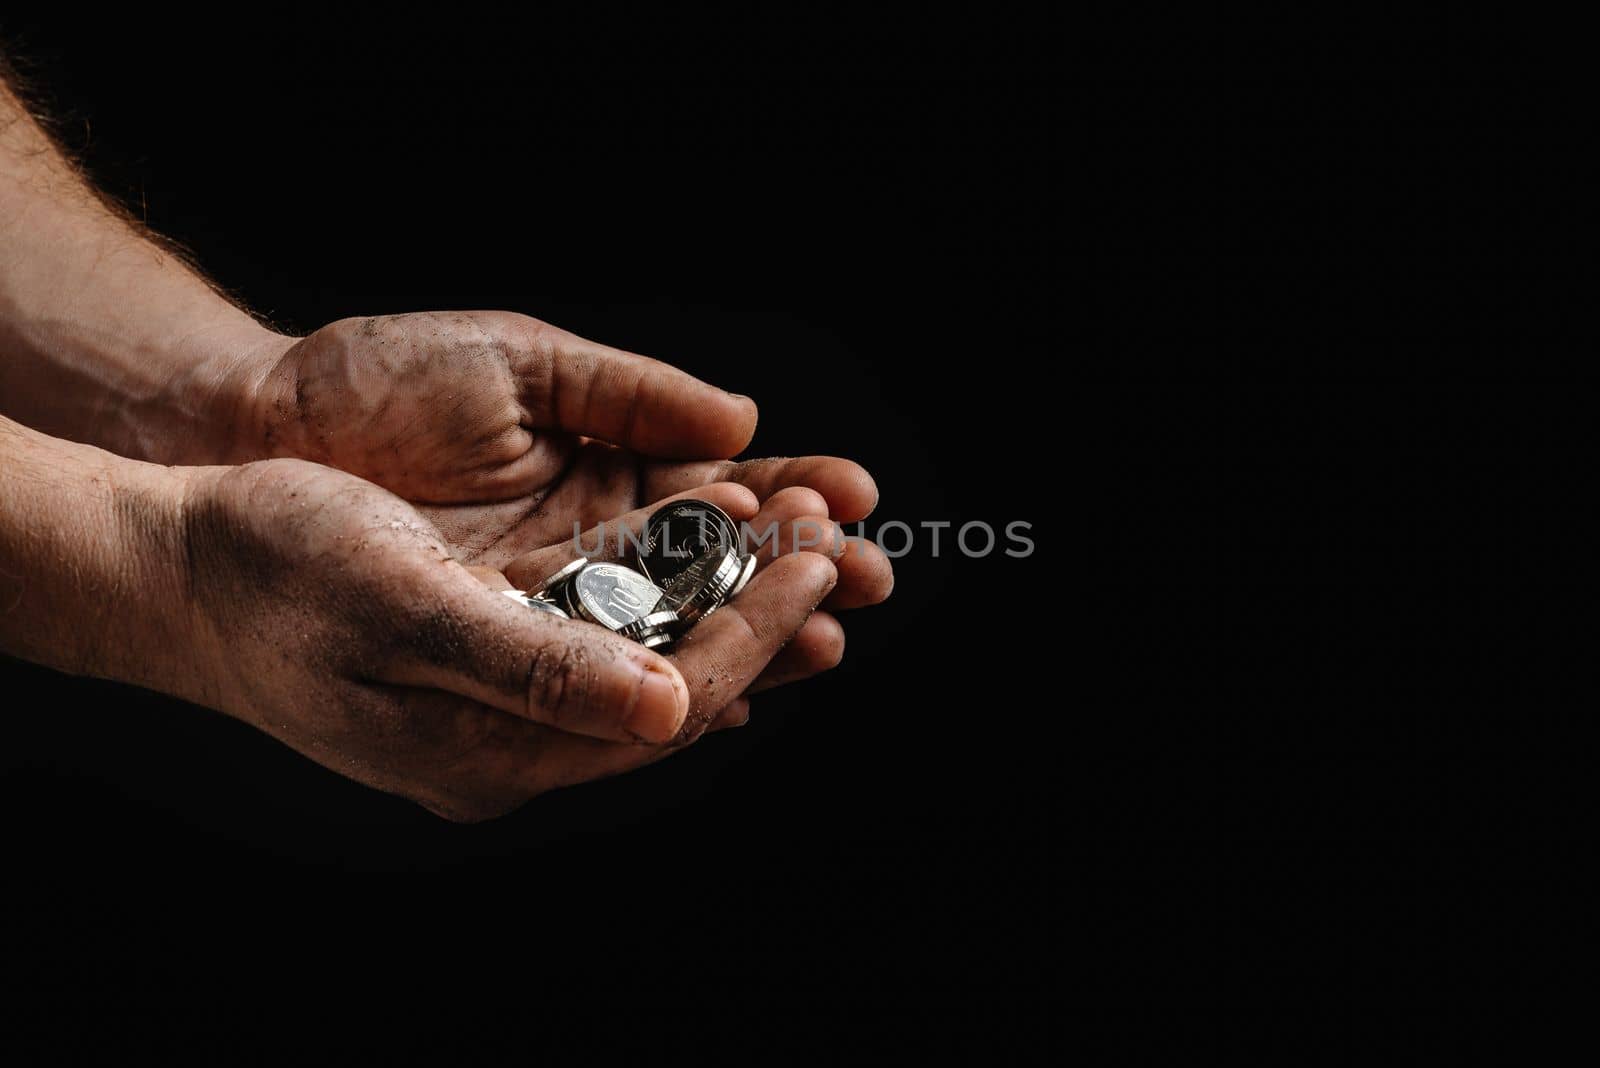 homeless outreach day. Dirty hands of a homeless man holding not much money against a black background. The concept of financial aid by gulyaevstudio